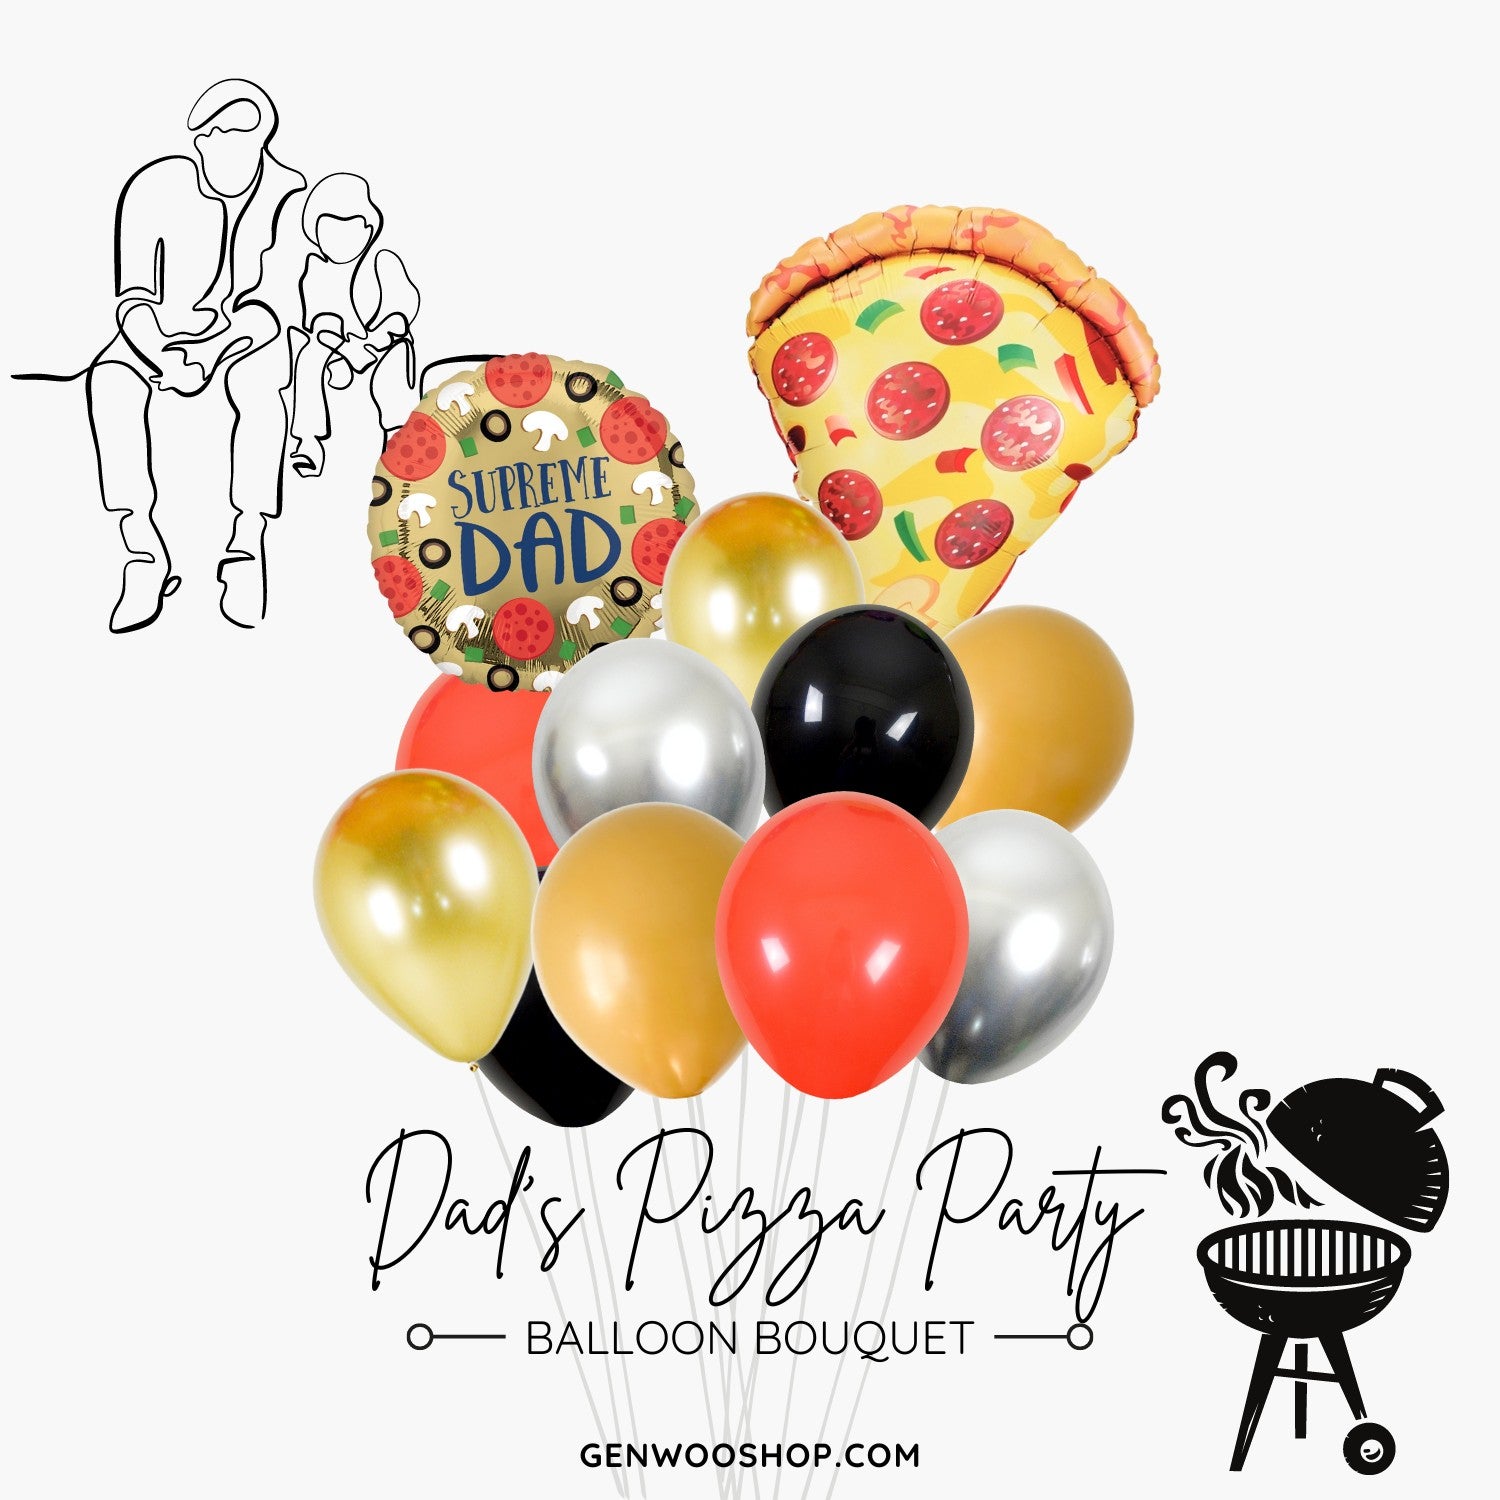 Dad's Pizza Party Balloon Bouquet - Dad's Birthday Party - Happy Father's Day - Ottawa Helium Balloon Services